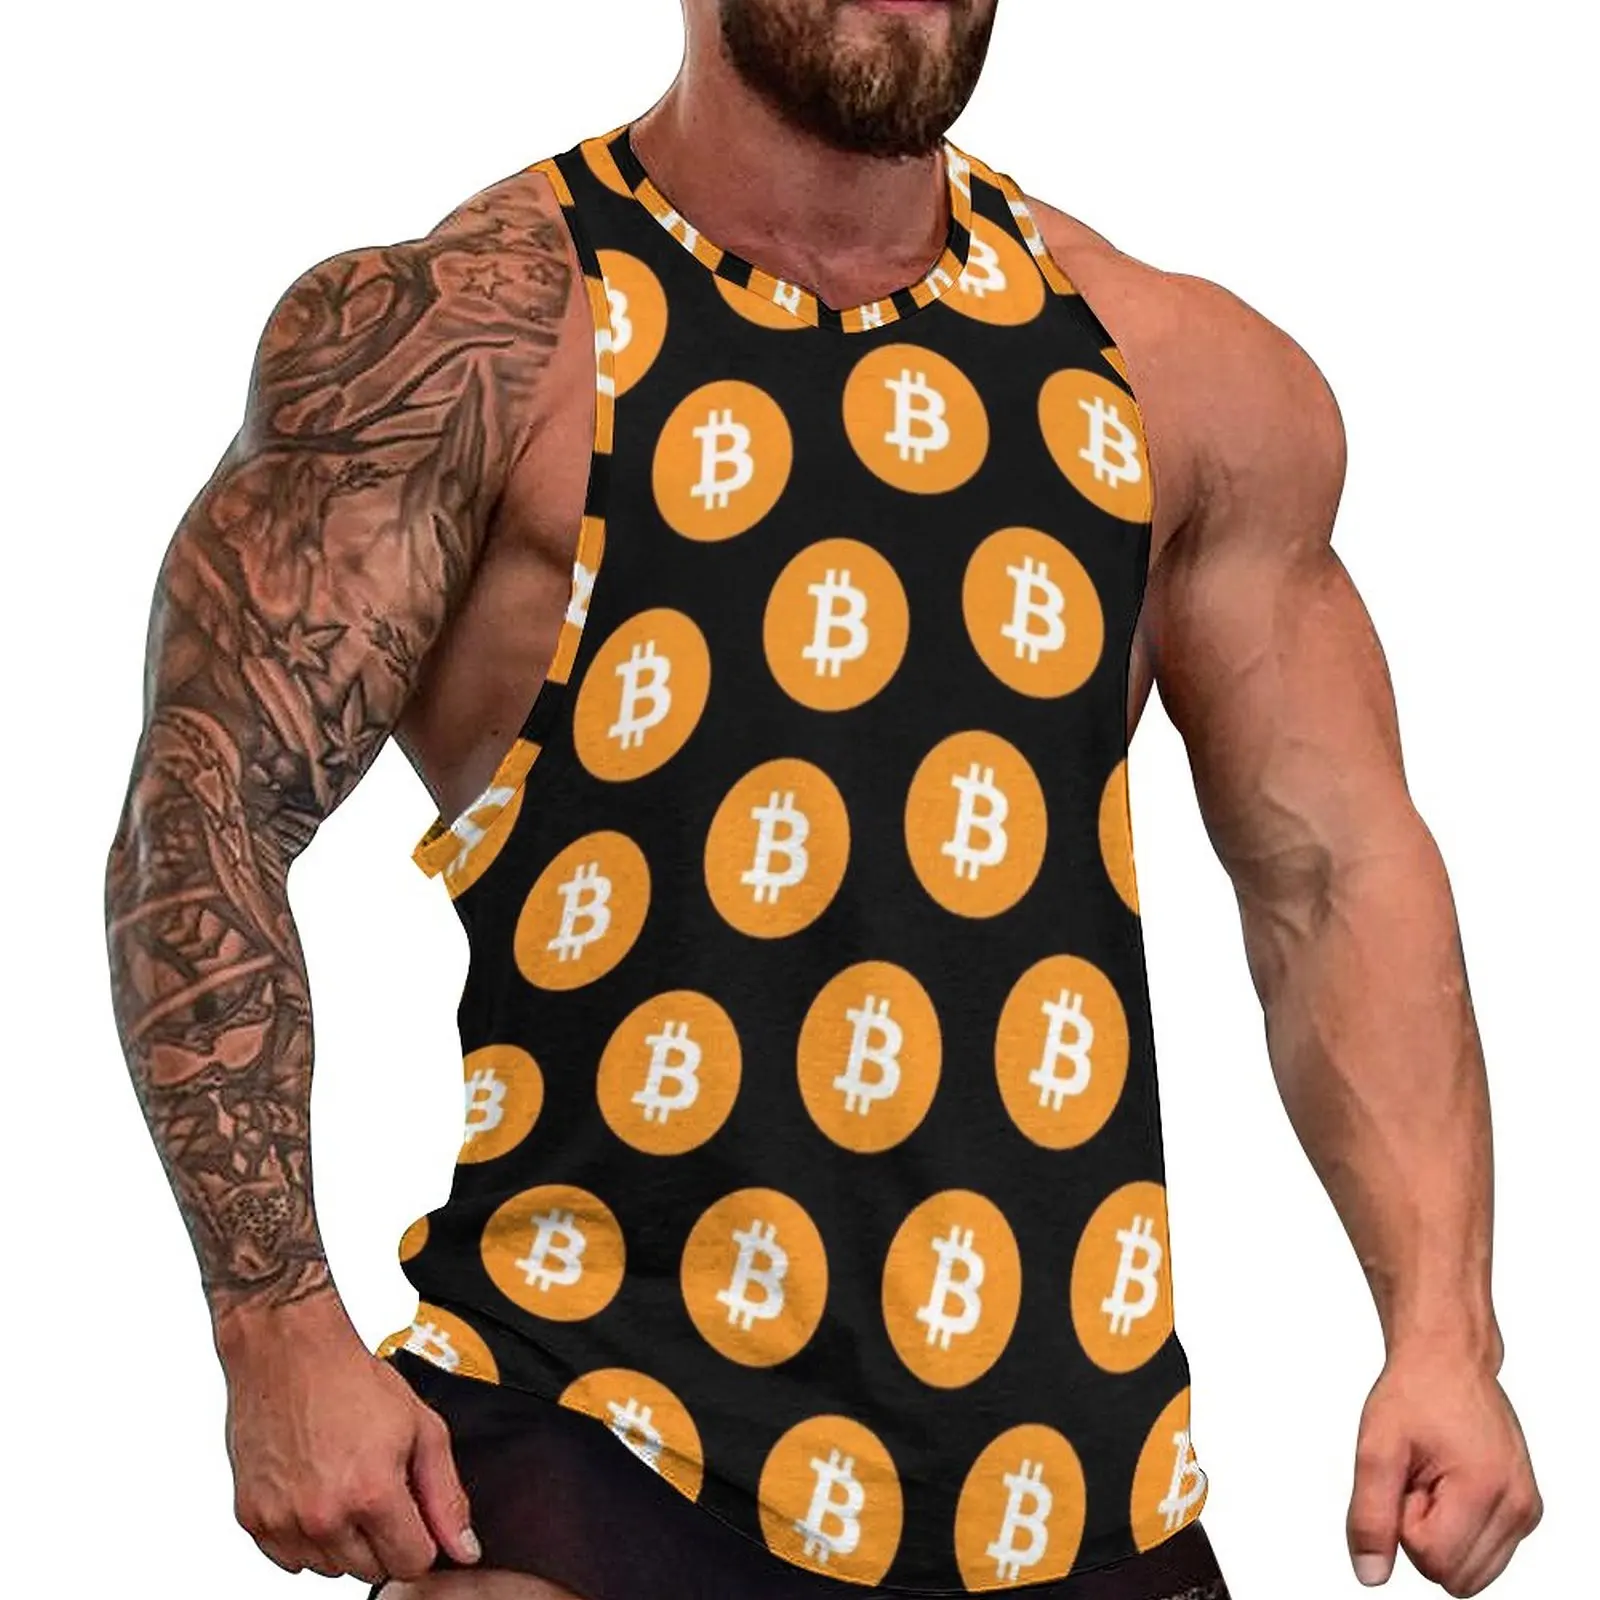 

Gold Coin Print Summer Tank Top Cryptocurrency Modern Training Tops Males Design Muscle Sleeveless Vests Big Size 4XL 5XL